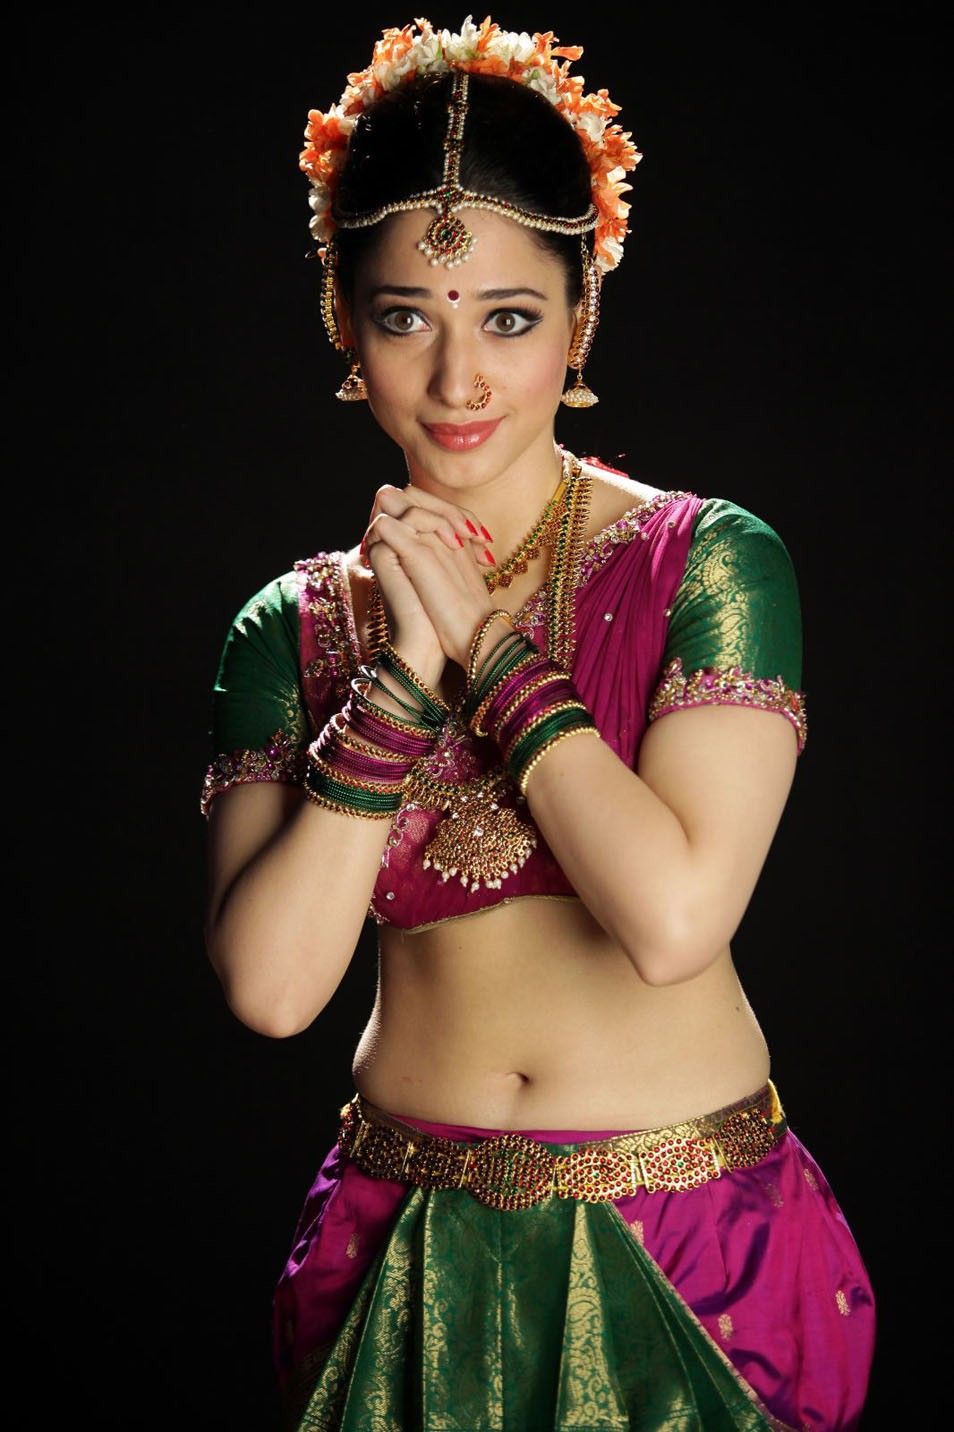 Indian Dance Google Search. Indian bollywood actress, Indian